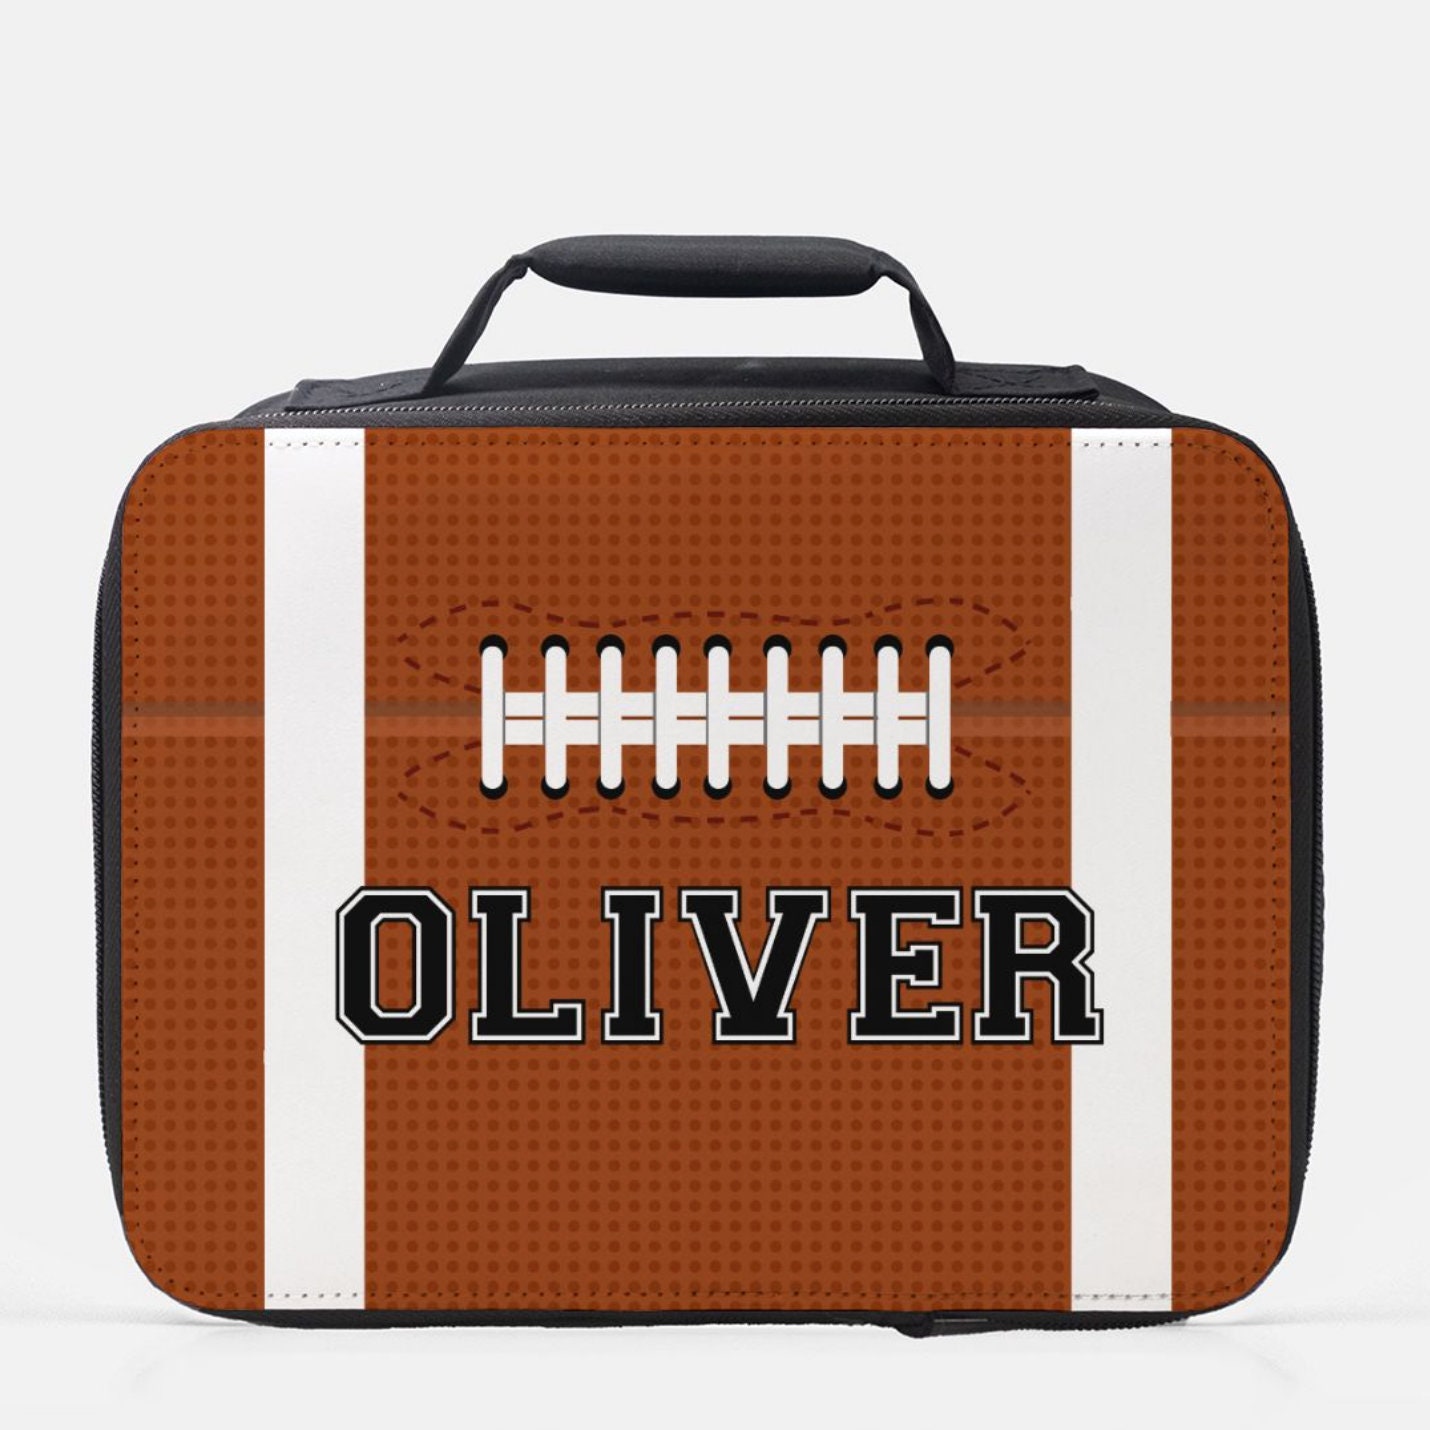 Expandable Lunch Box for Men, Sports Lunch Box for Teen Boy, Insulated Football Lunch Bag for Men Teenagers Boy, Reusable Lunchbox with Shoulder